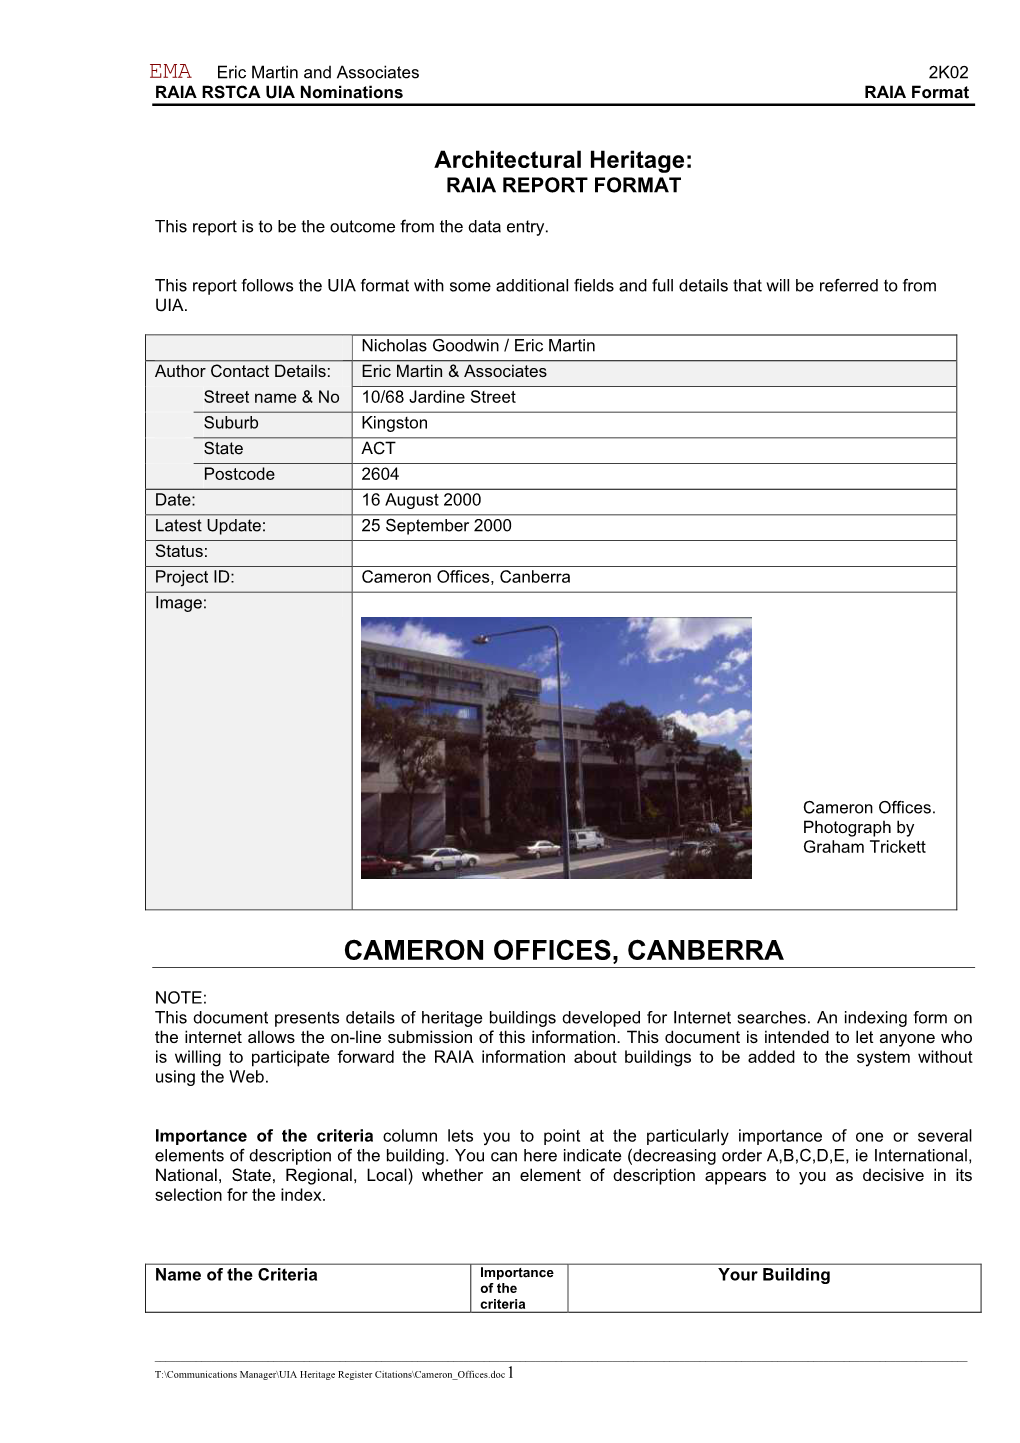 Cameron Offices, Canberra Image